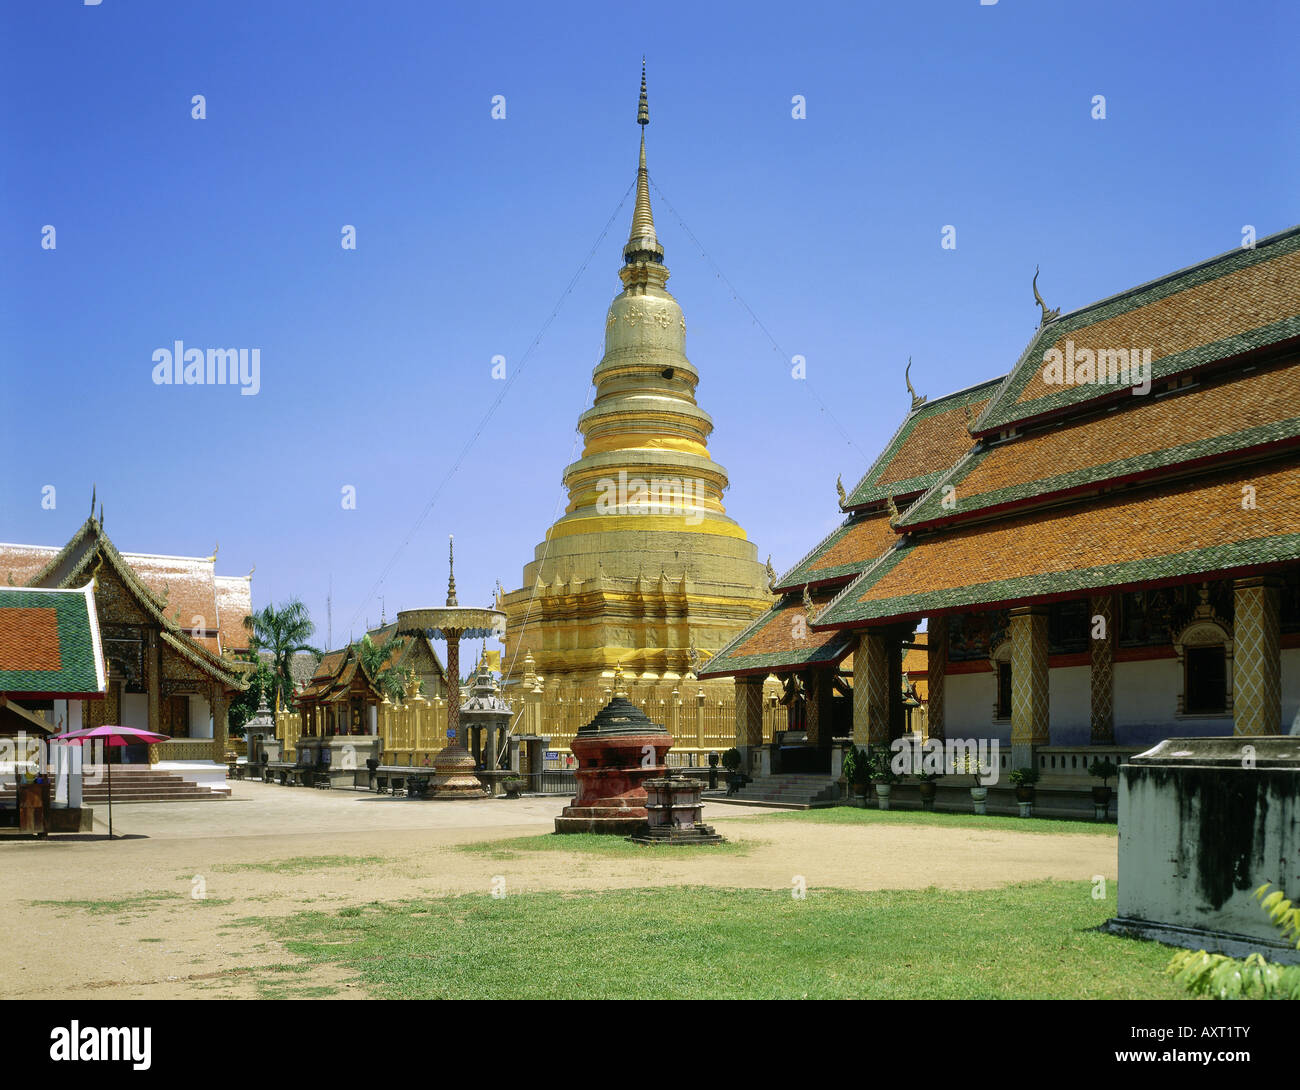 geography / travel, Thailand, cloisters, cloister Wat Doi Suthep, golden Chedi at Chiang May, temple area, exterior view, gold Stock Photo